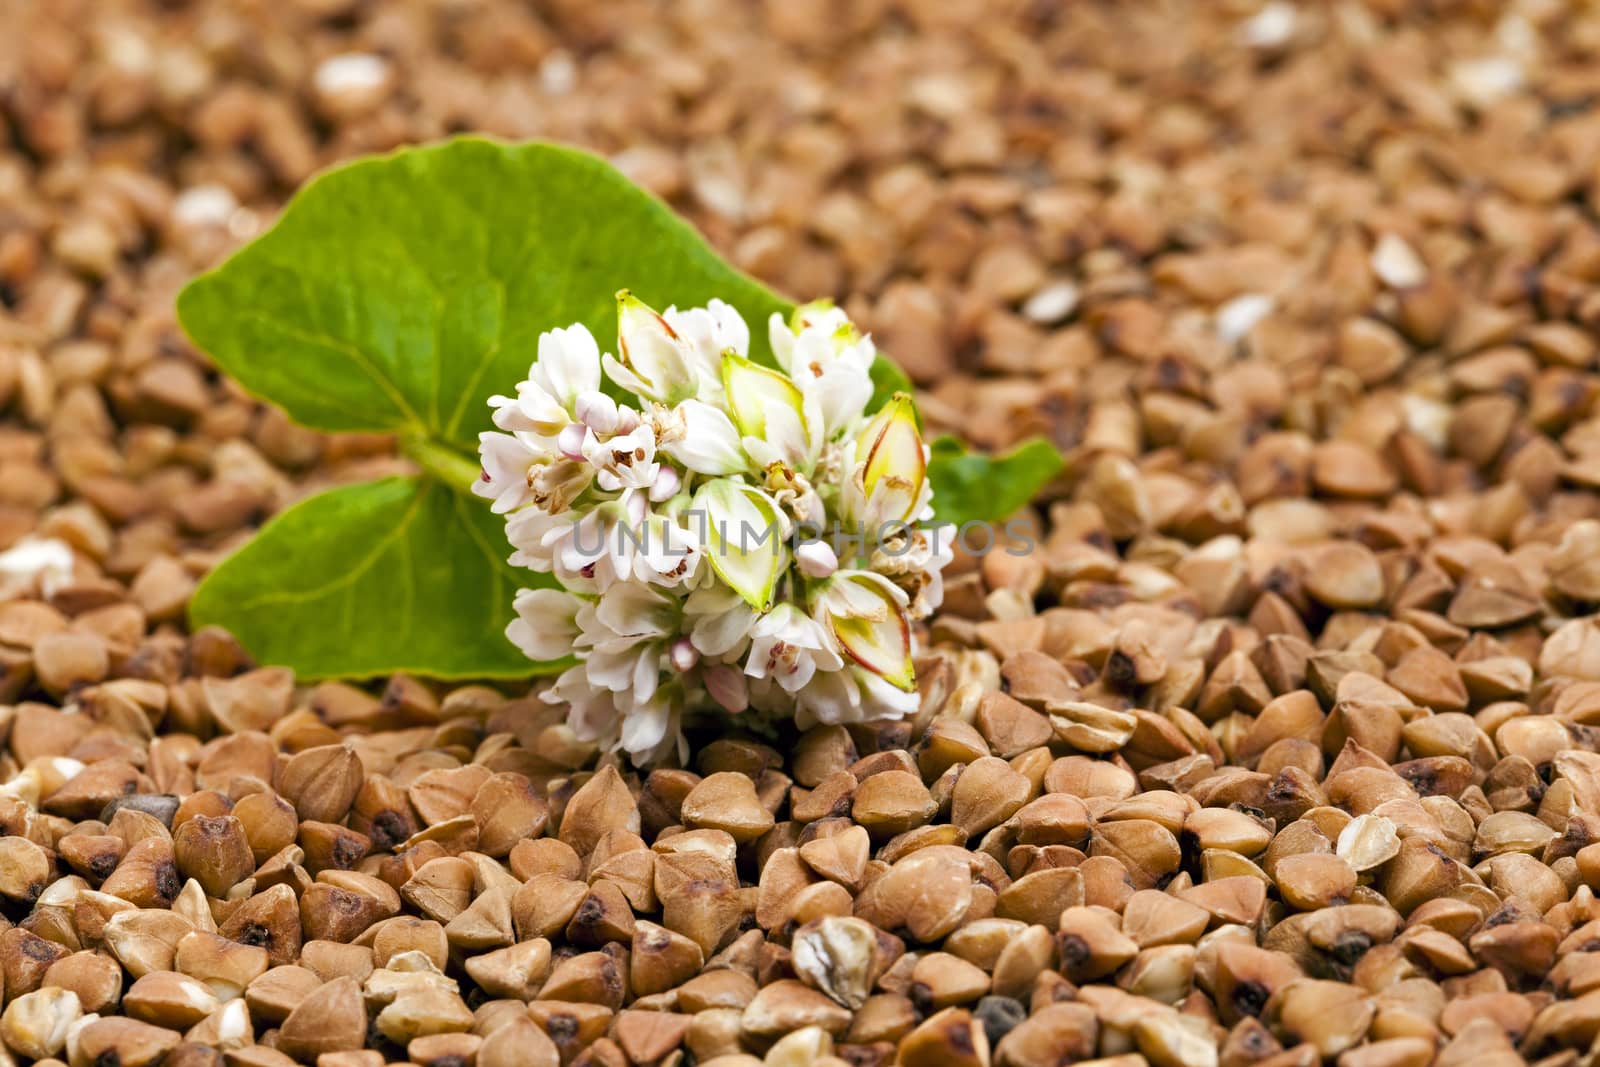  the buckwheat flower photographed by a close up lying on buckwheat grains